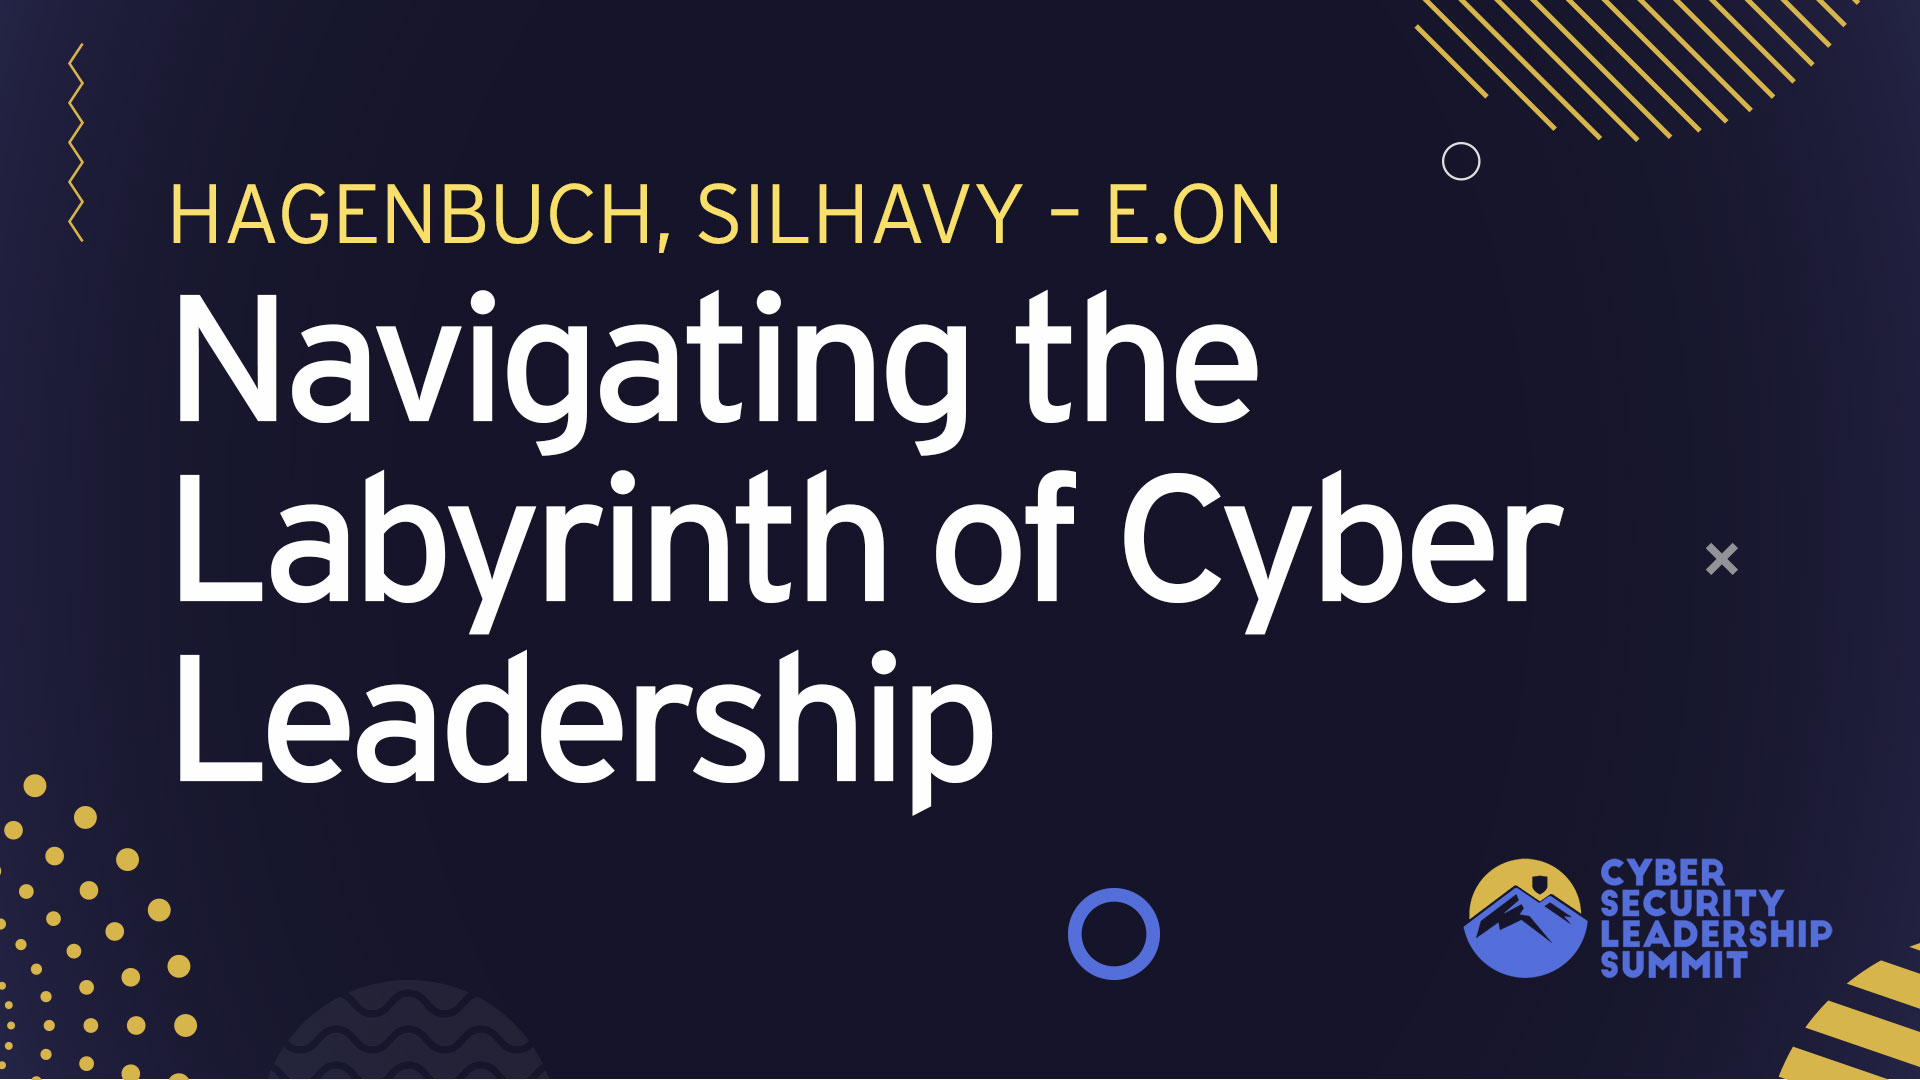 Achievement Unlocked: Navigating the Labyrinth of Cyber Leadership